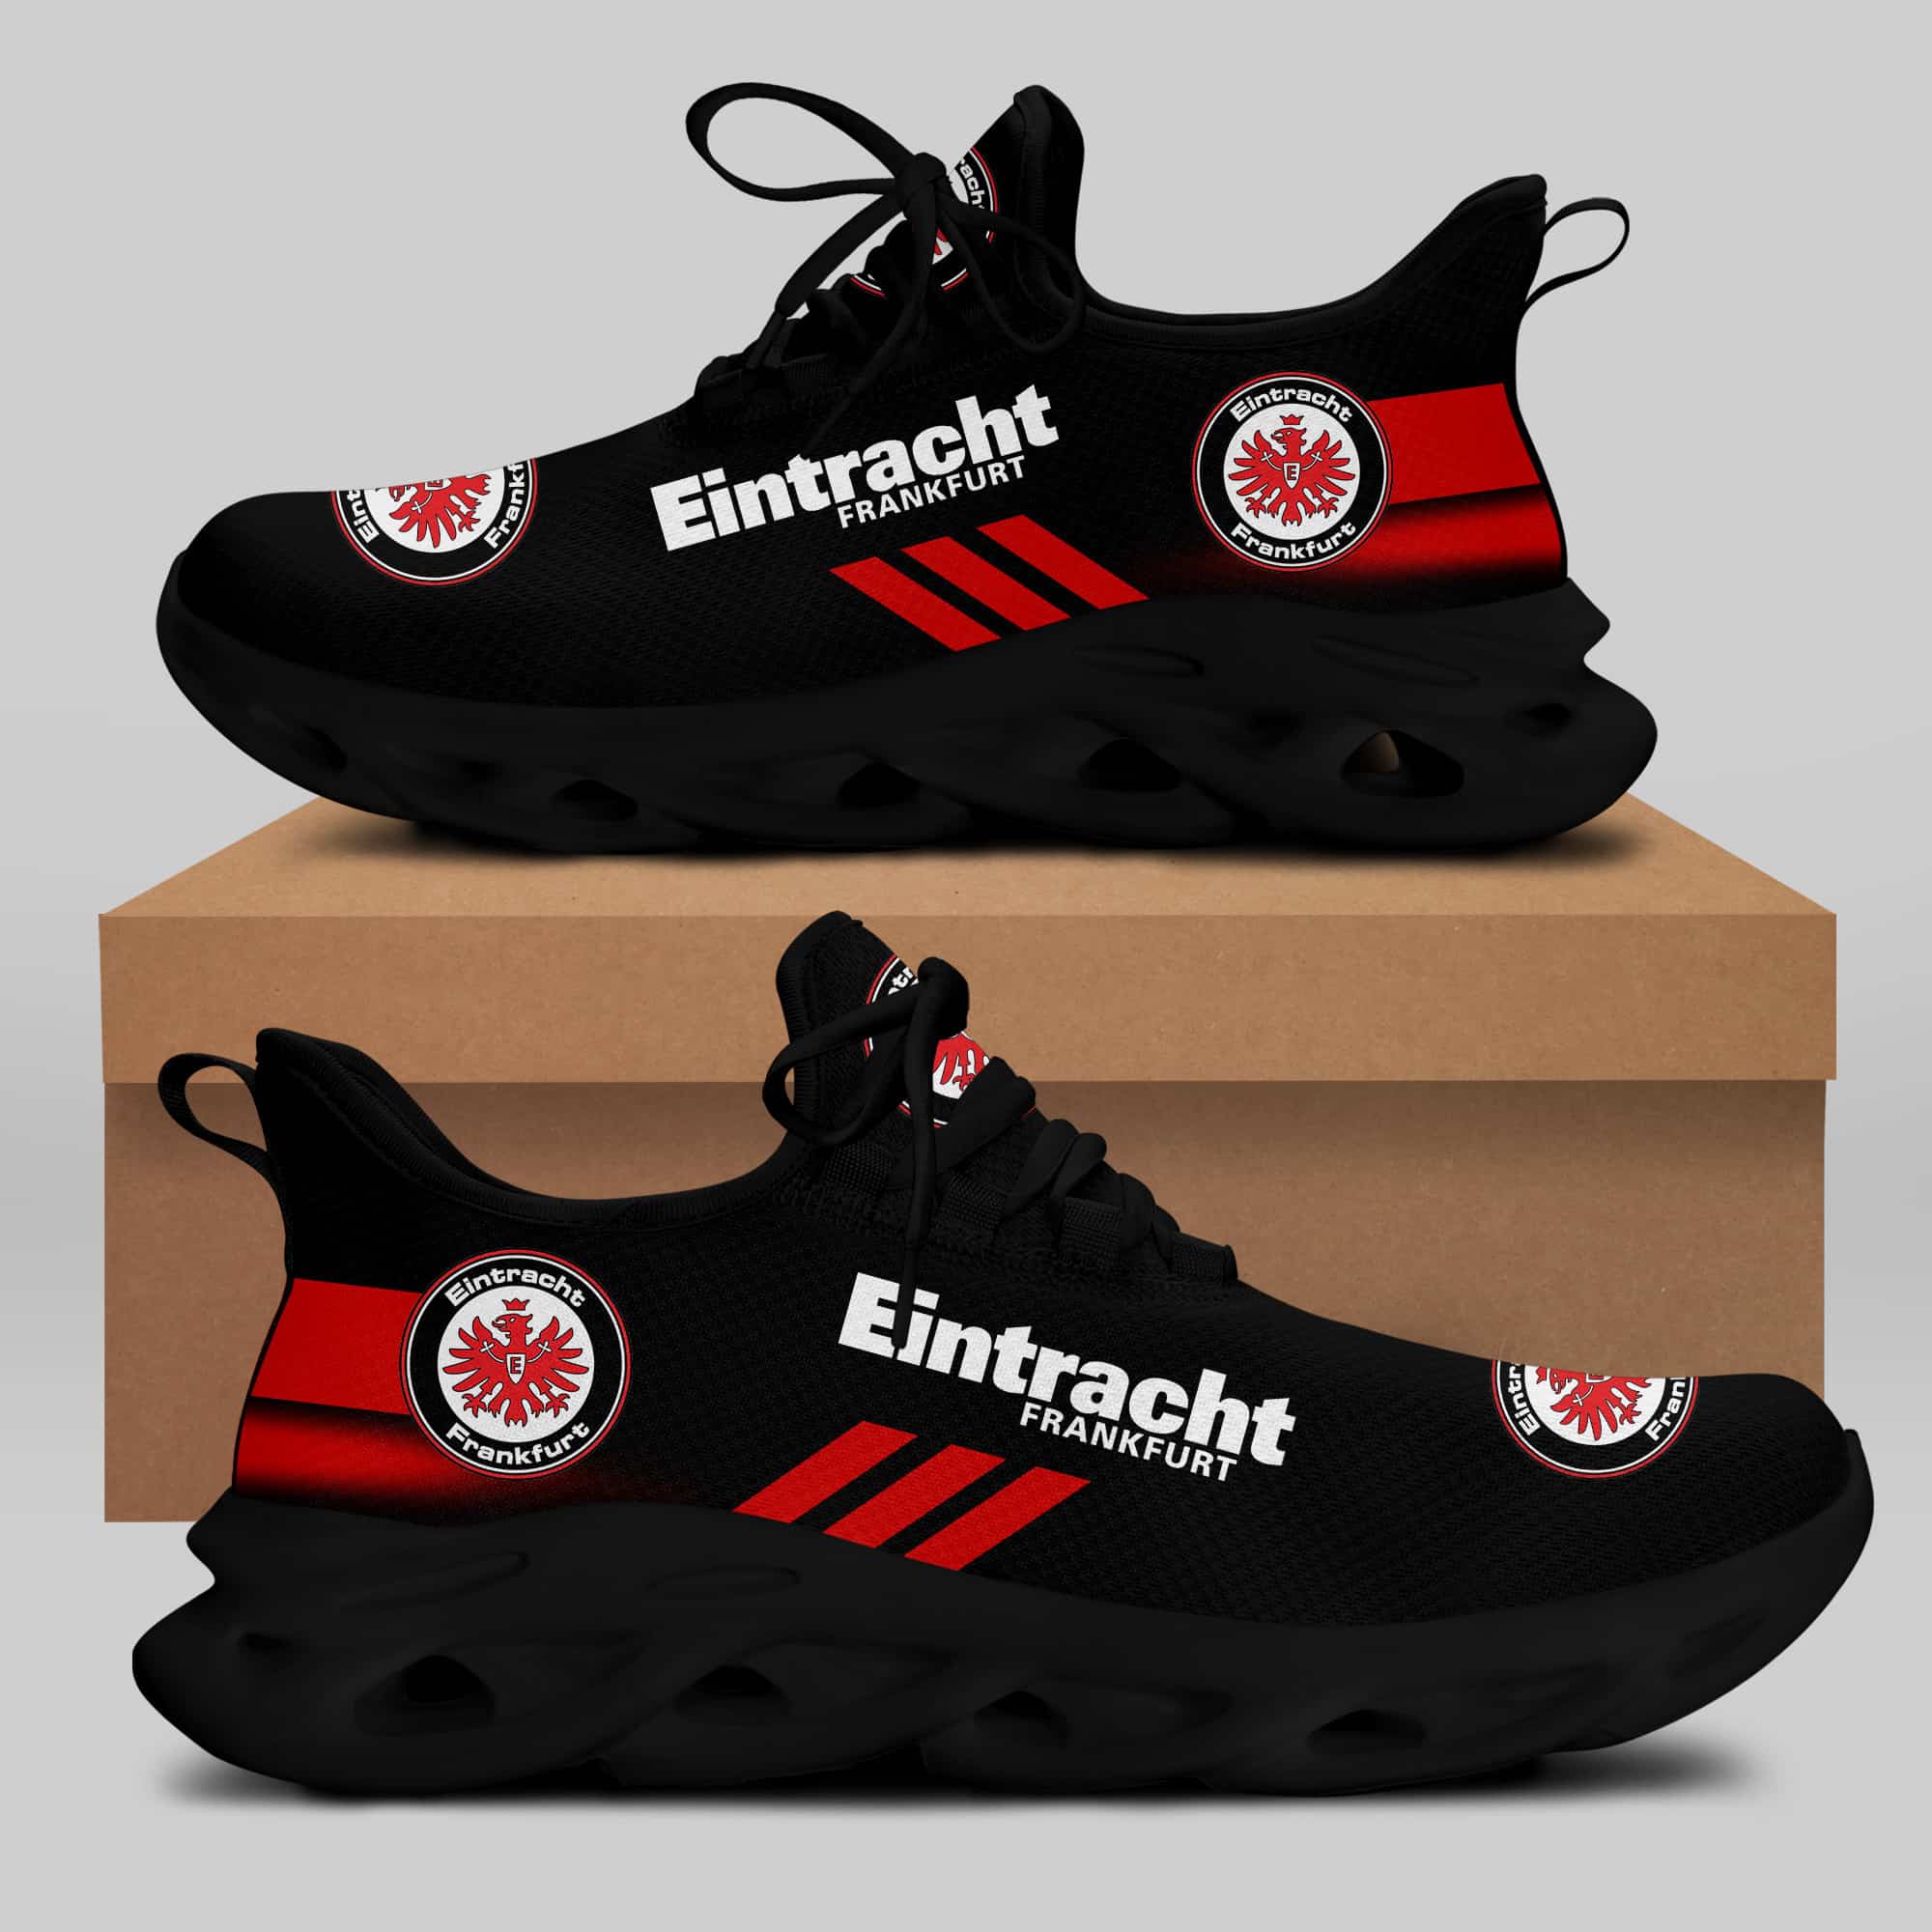 Eintracht Frankfurt Running Shoes Max Soul Shoes Sneakers Ver 8 1